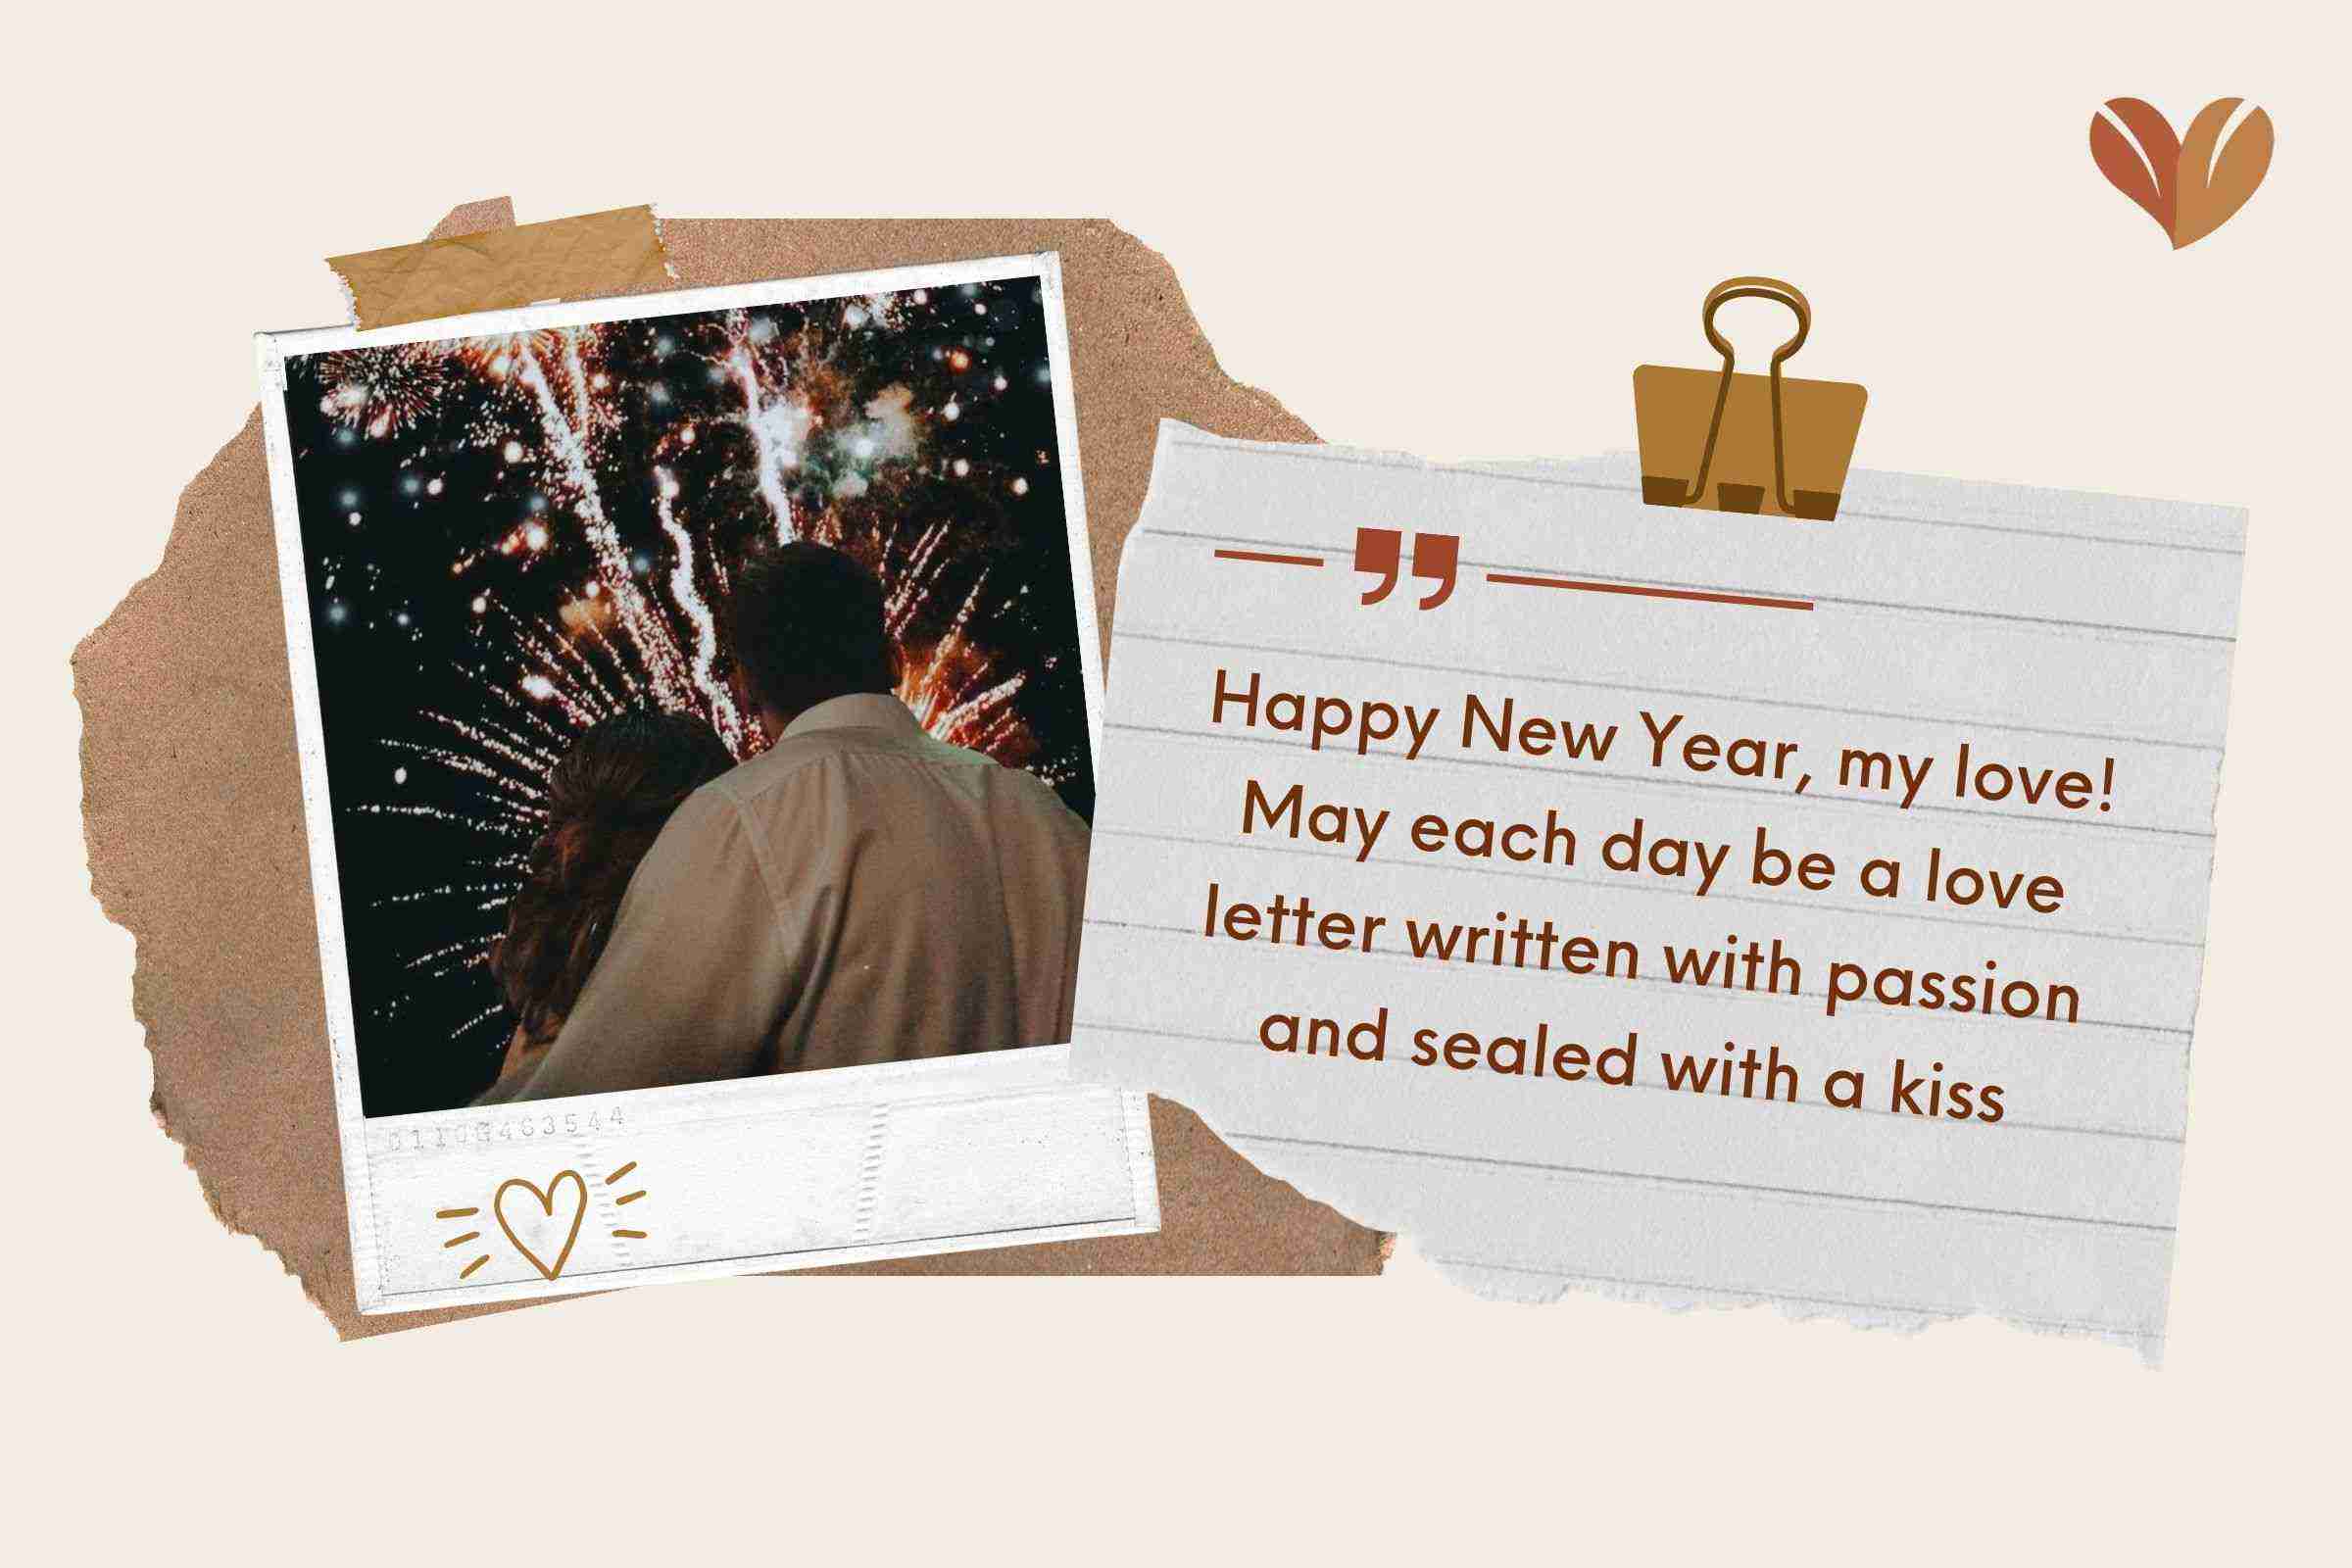 Happy New Year, my love! May each day be a love letter written with passion and sealed with a kiss